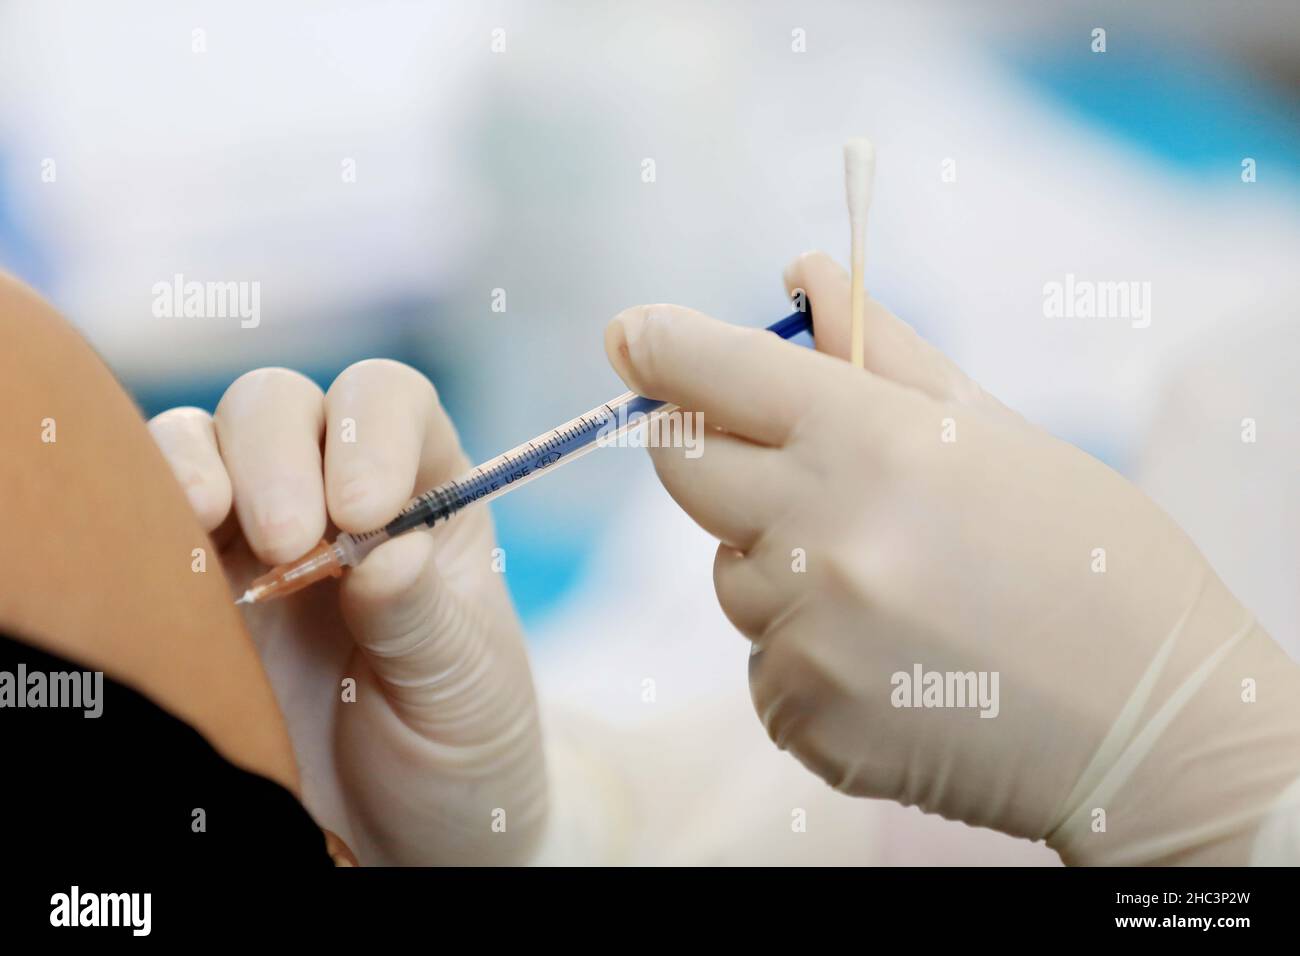 LIUZHOU, CHINA - DECEMBER 12, 2021 - Medical workers administer 'booster needle' at a centralized vaccination site for COVID-19 vaccine in Liuzhou, Gu Stock Photo